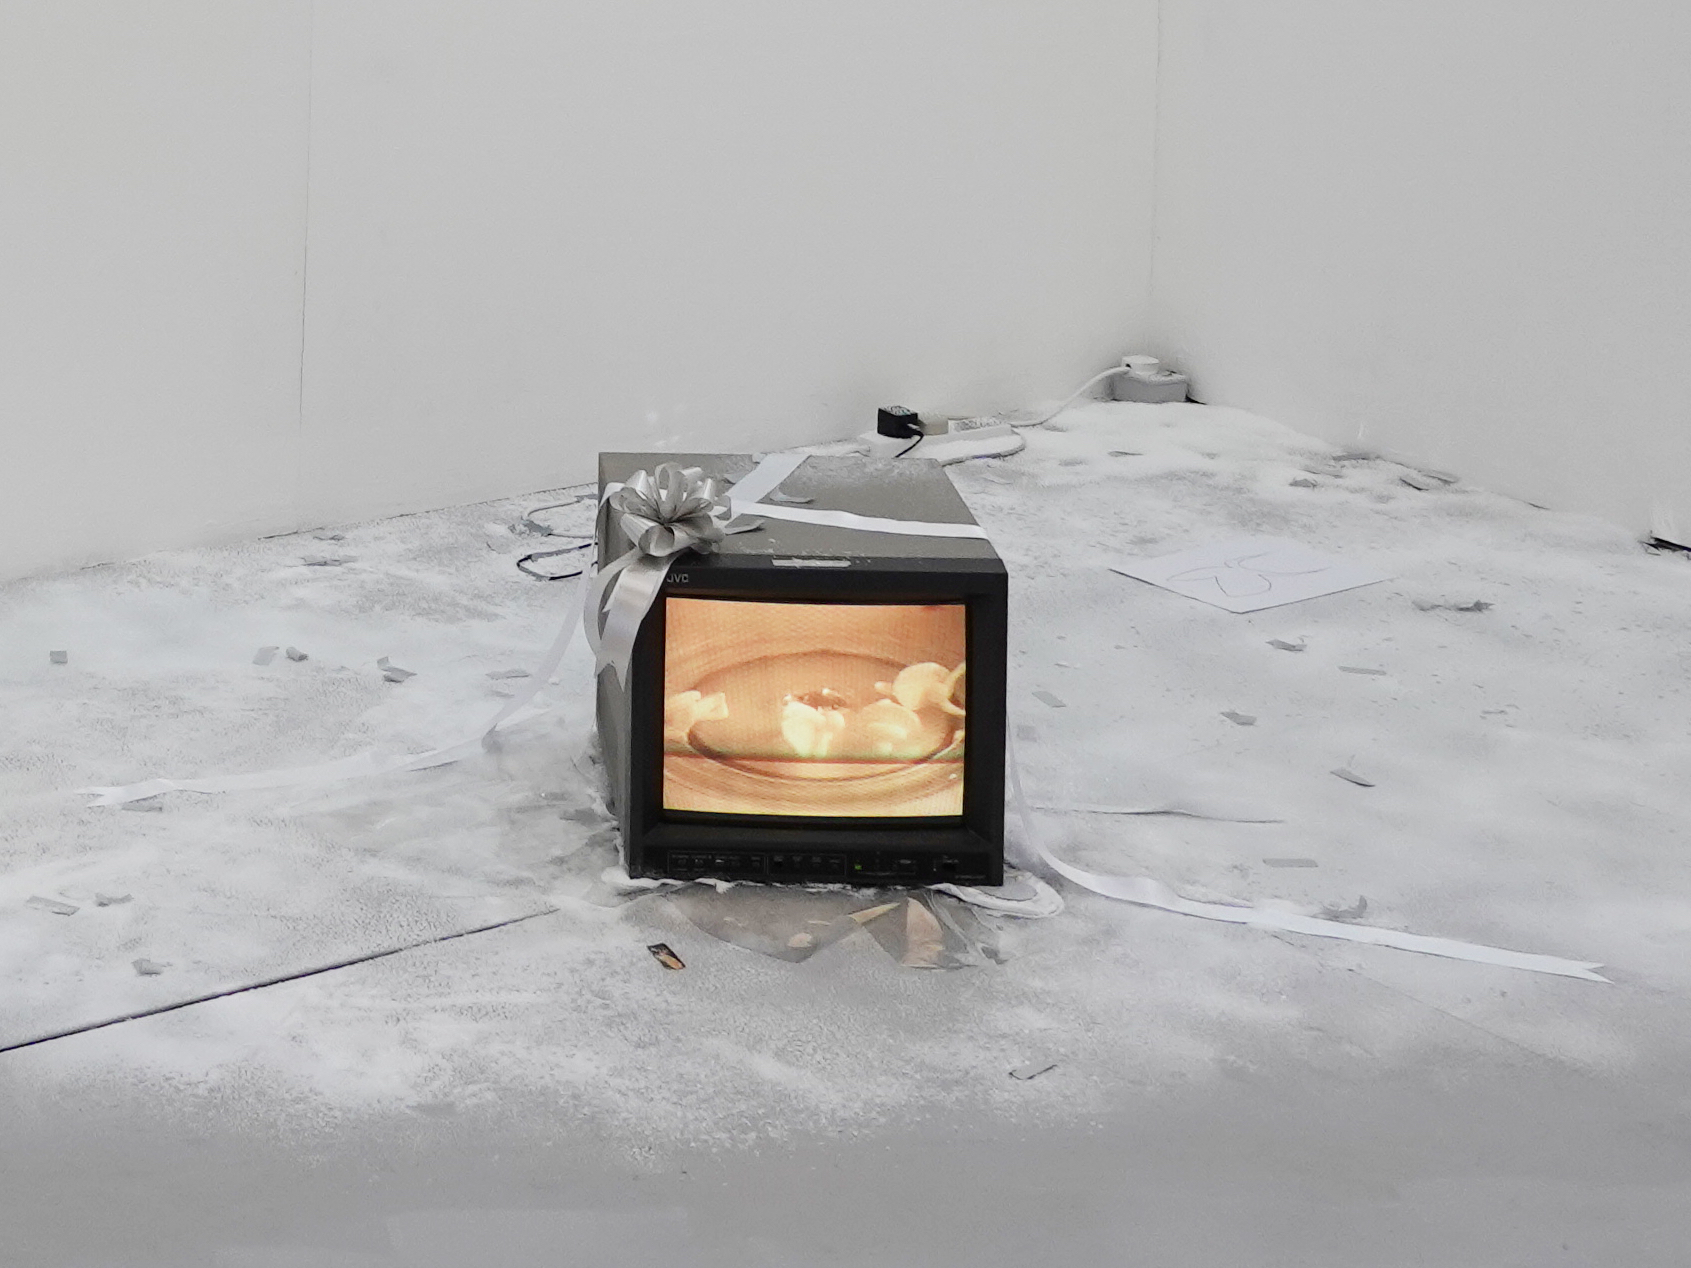 An image of a small monitor on a white floor depicting a fire.